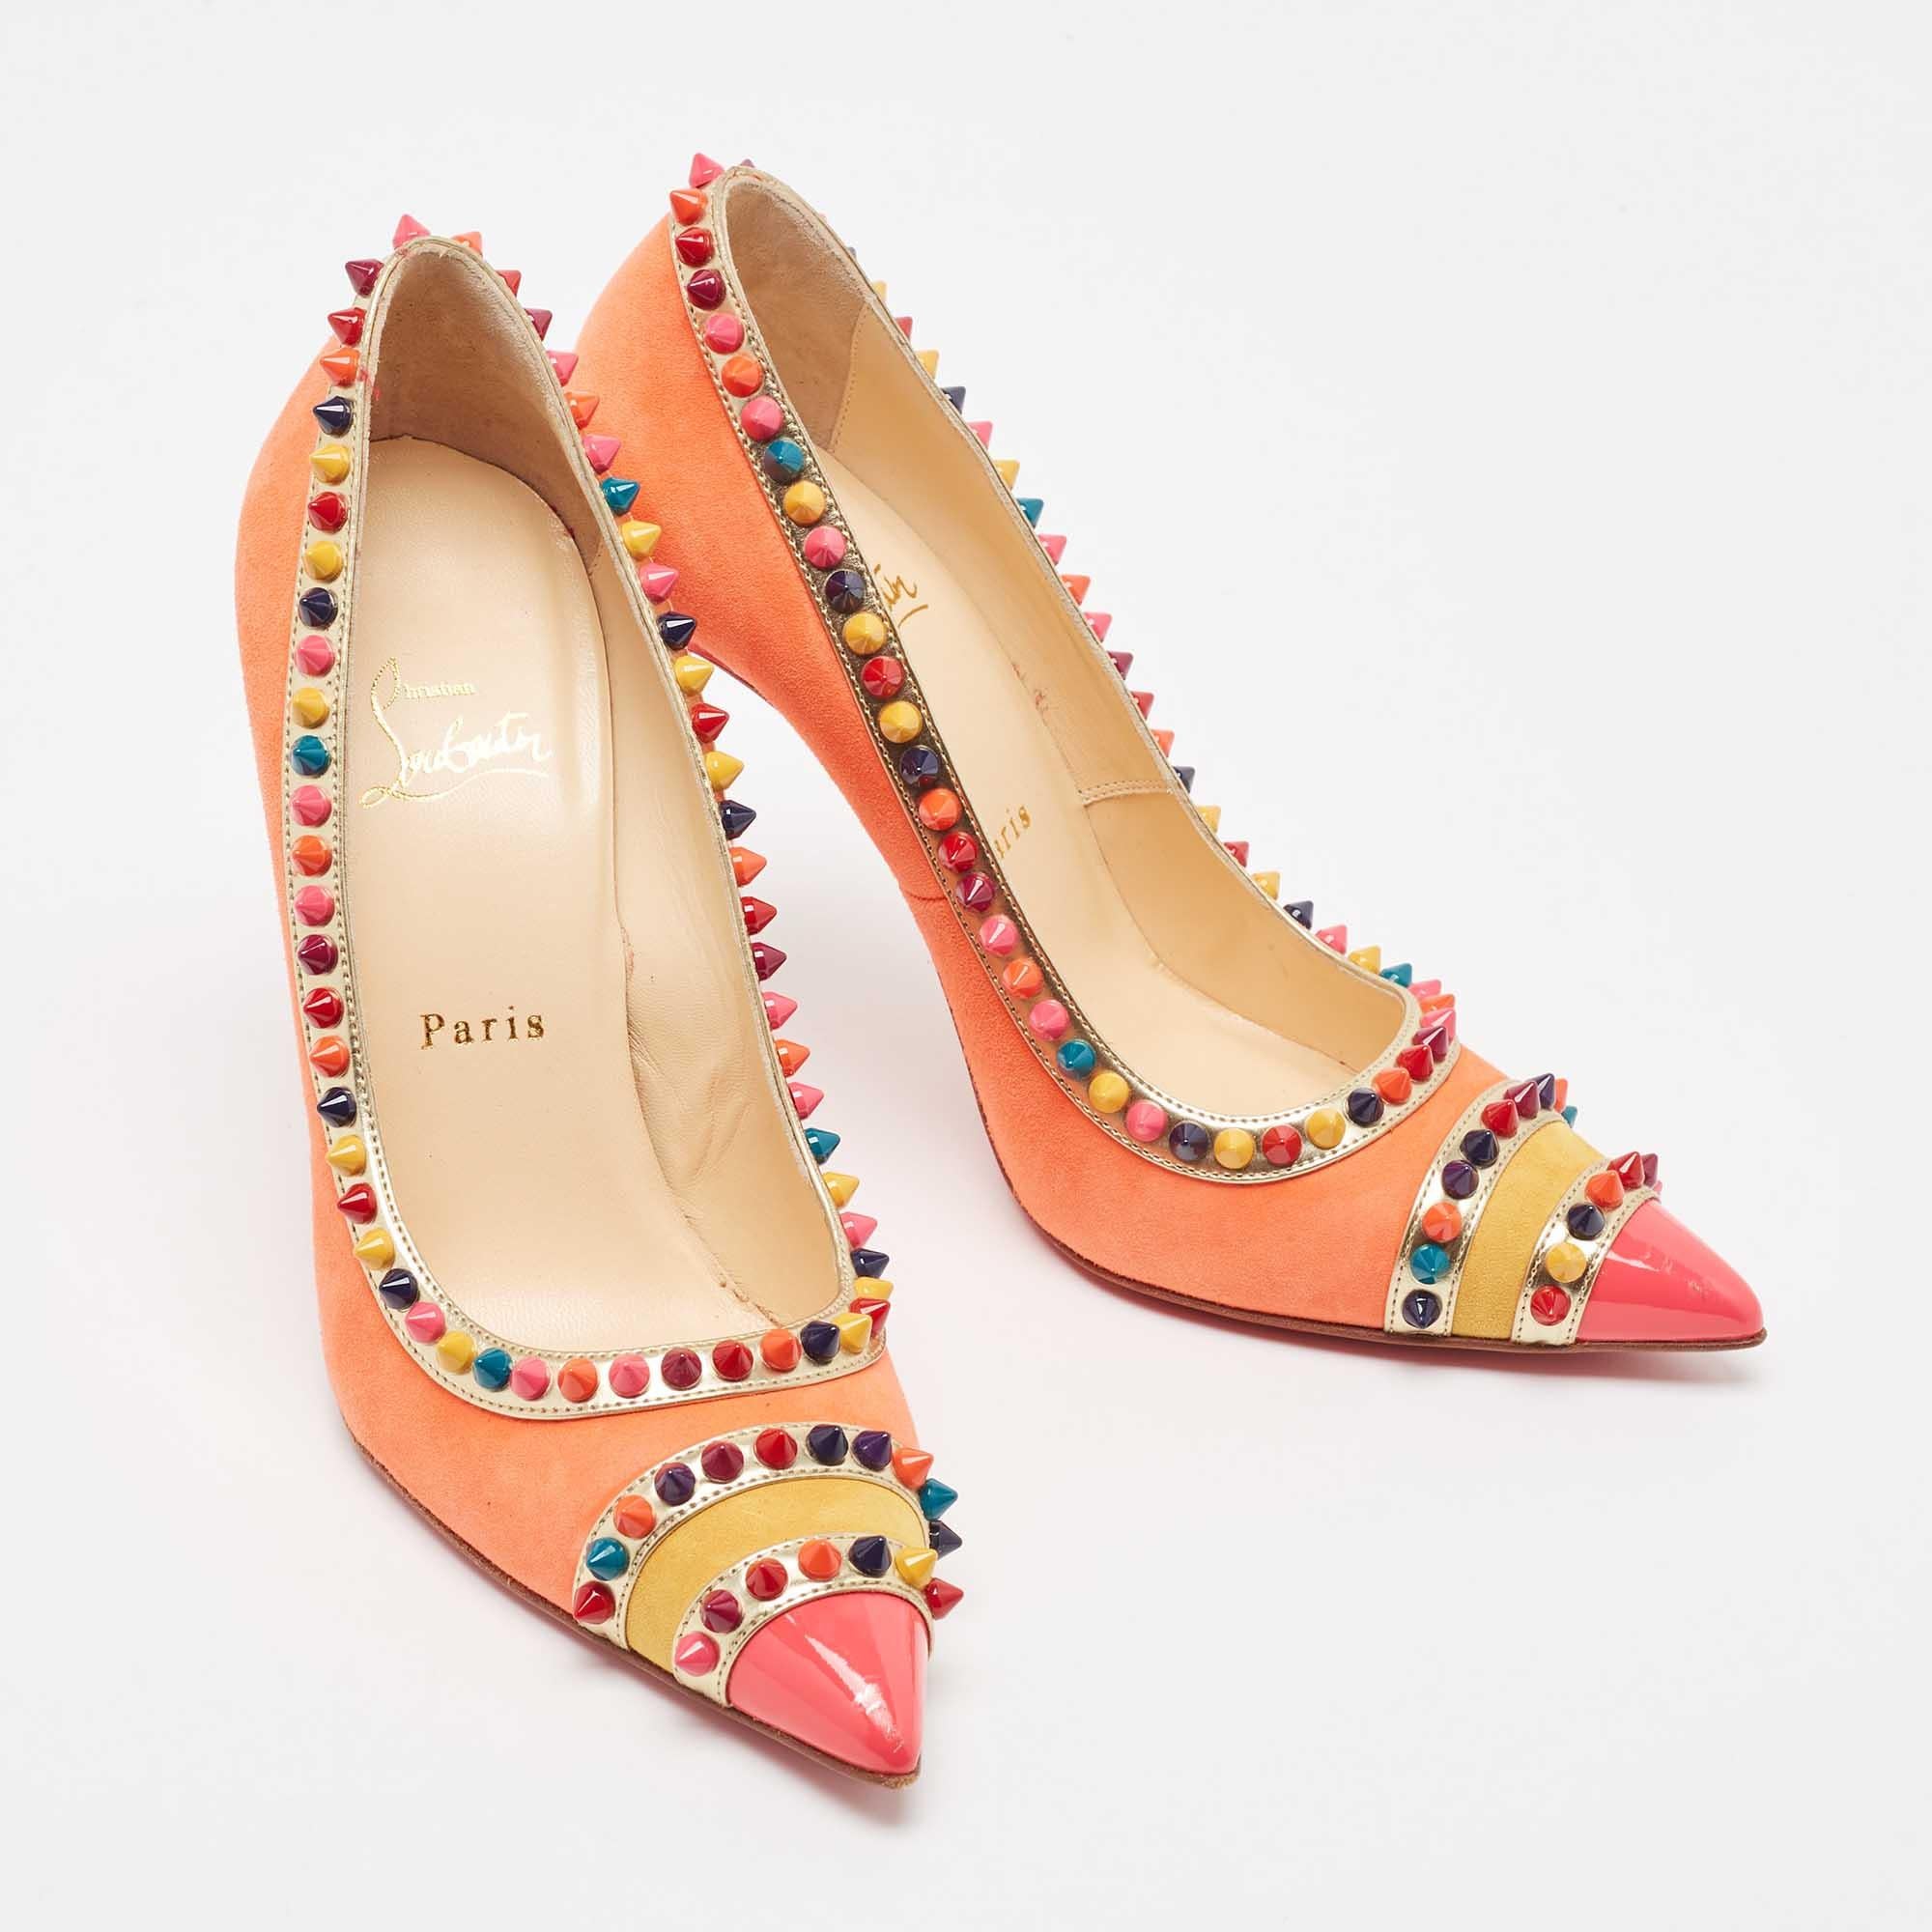 Christian Louboutin Multicolor Suede and Leather Malabar Hill Pumps Size 39 2